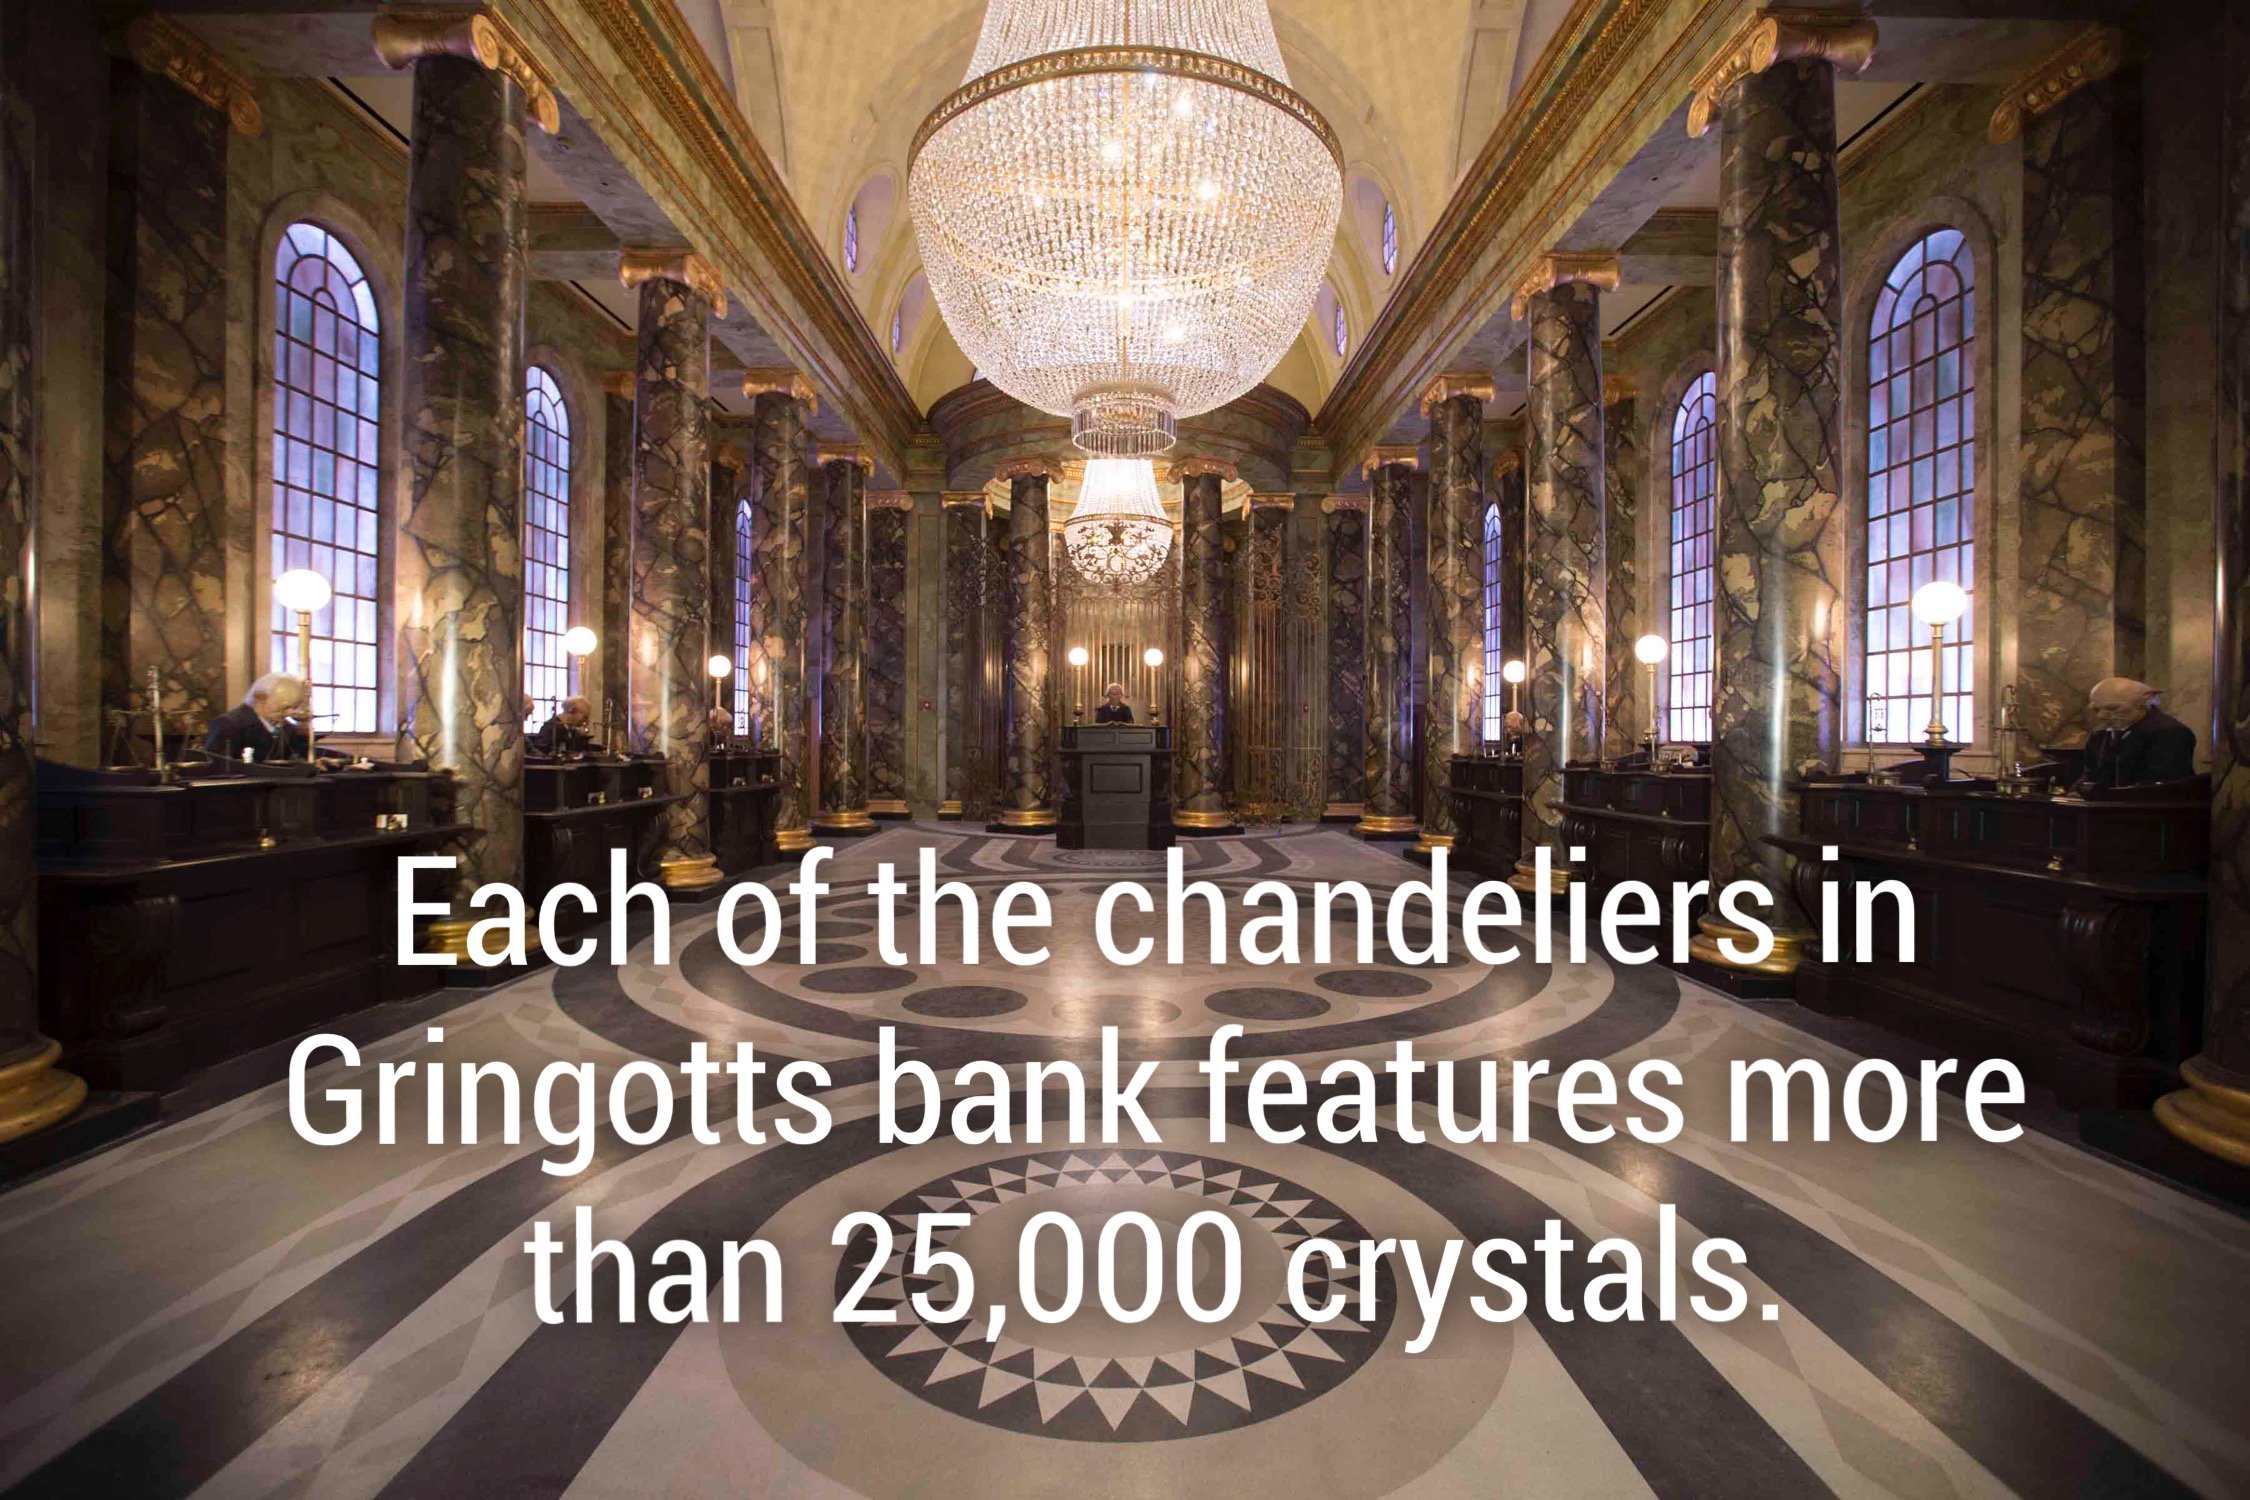 diagon alley wizarding world of harry potter - Iva Each of the chandeliers in Gringotts bank features more than 25,000 crystals.